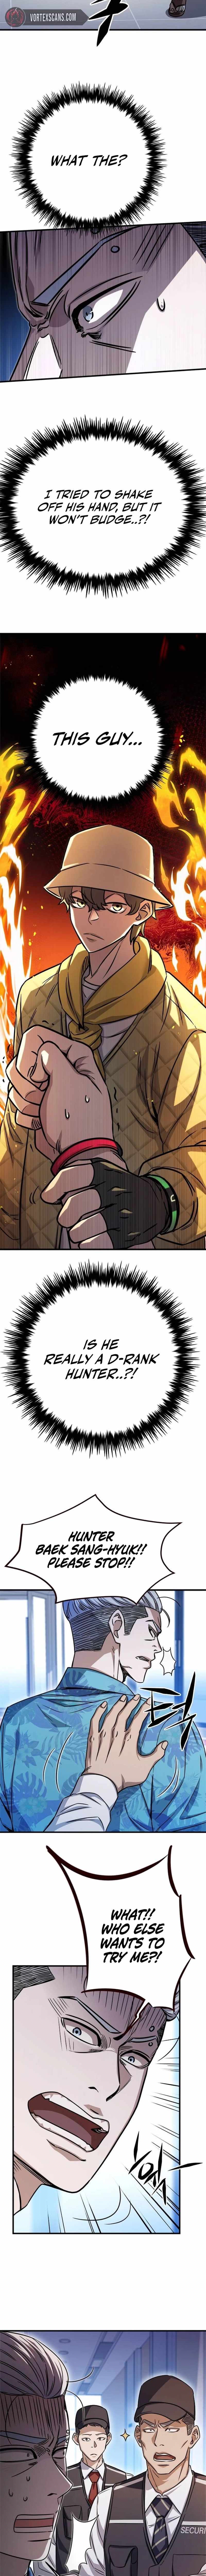 The legendary hunter becomes young again Chapter 9